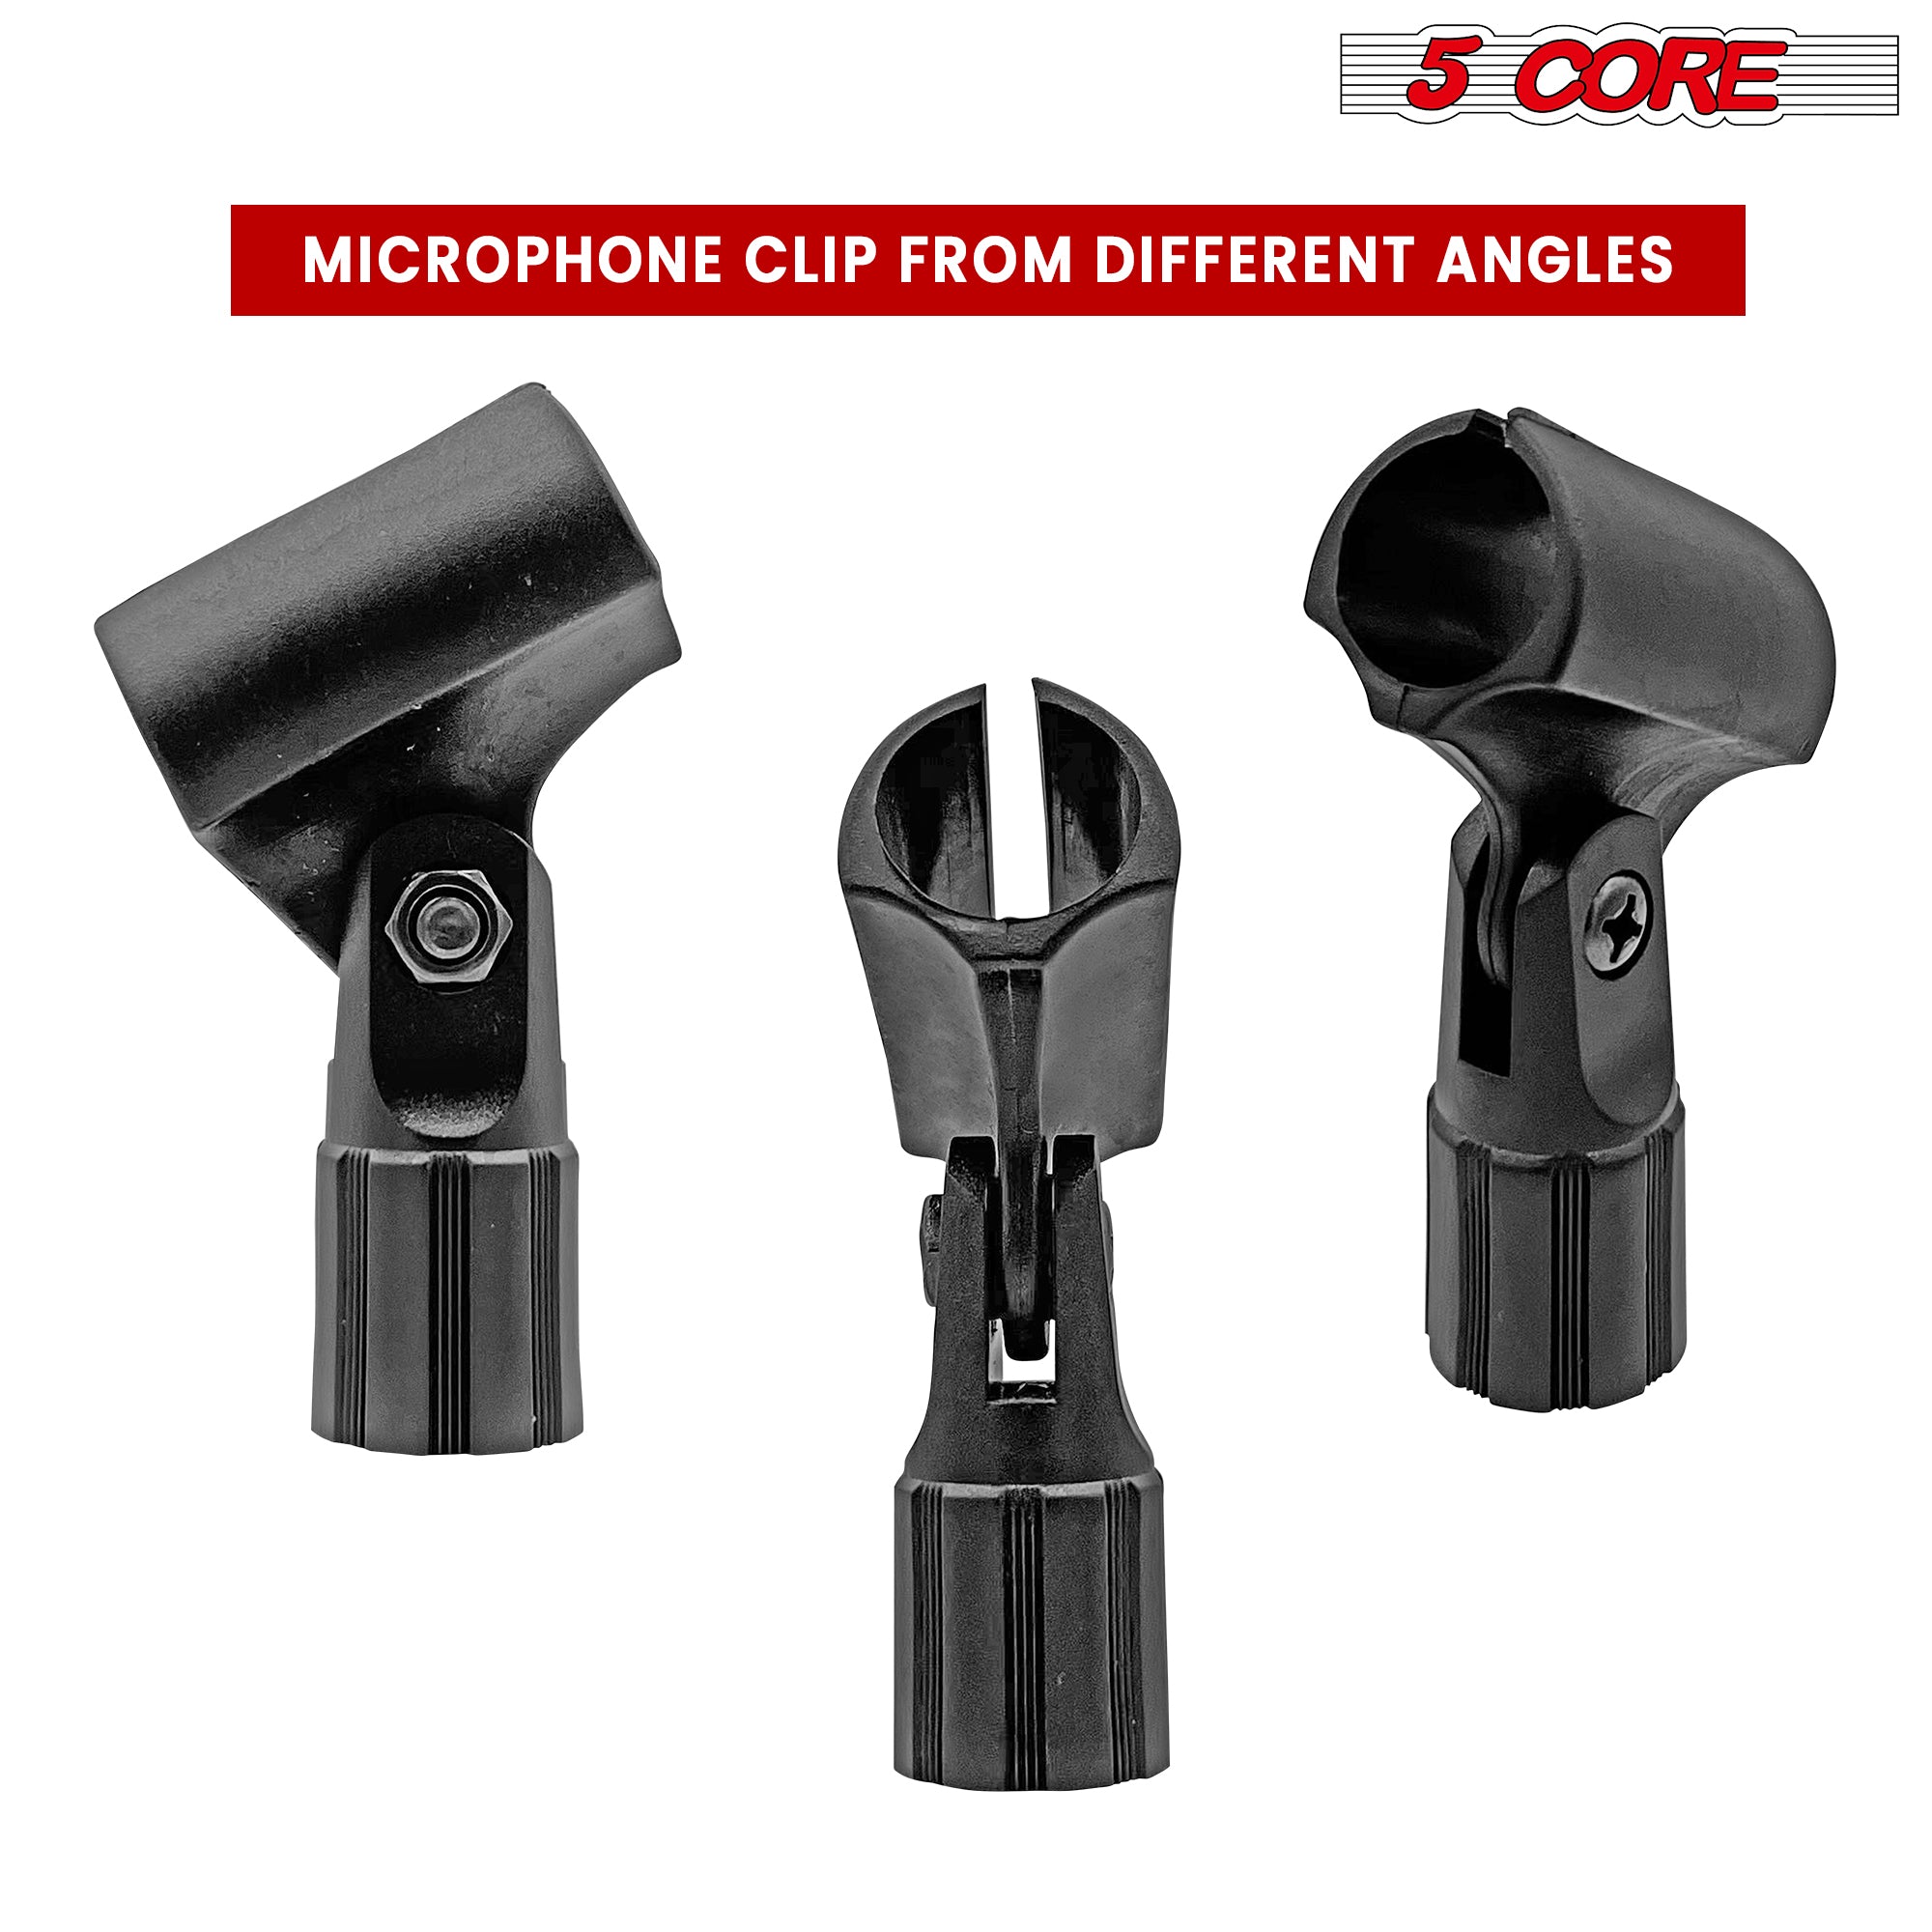 5 Core Universal Microphone Clip Holder 4Pack Mic Mount w Gold Plated 5/8" - 3/8" Screw Adapter